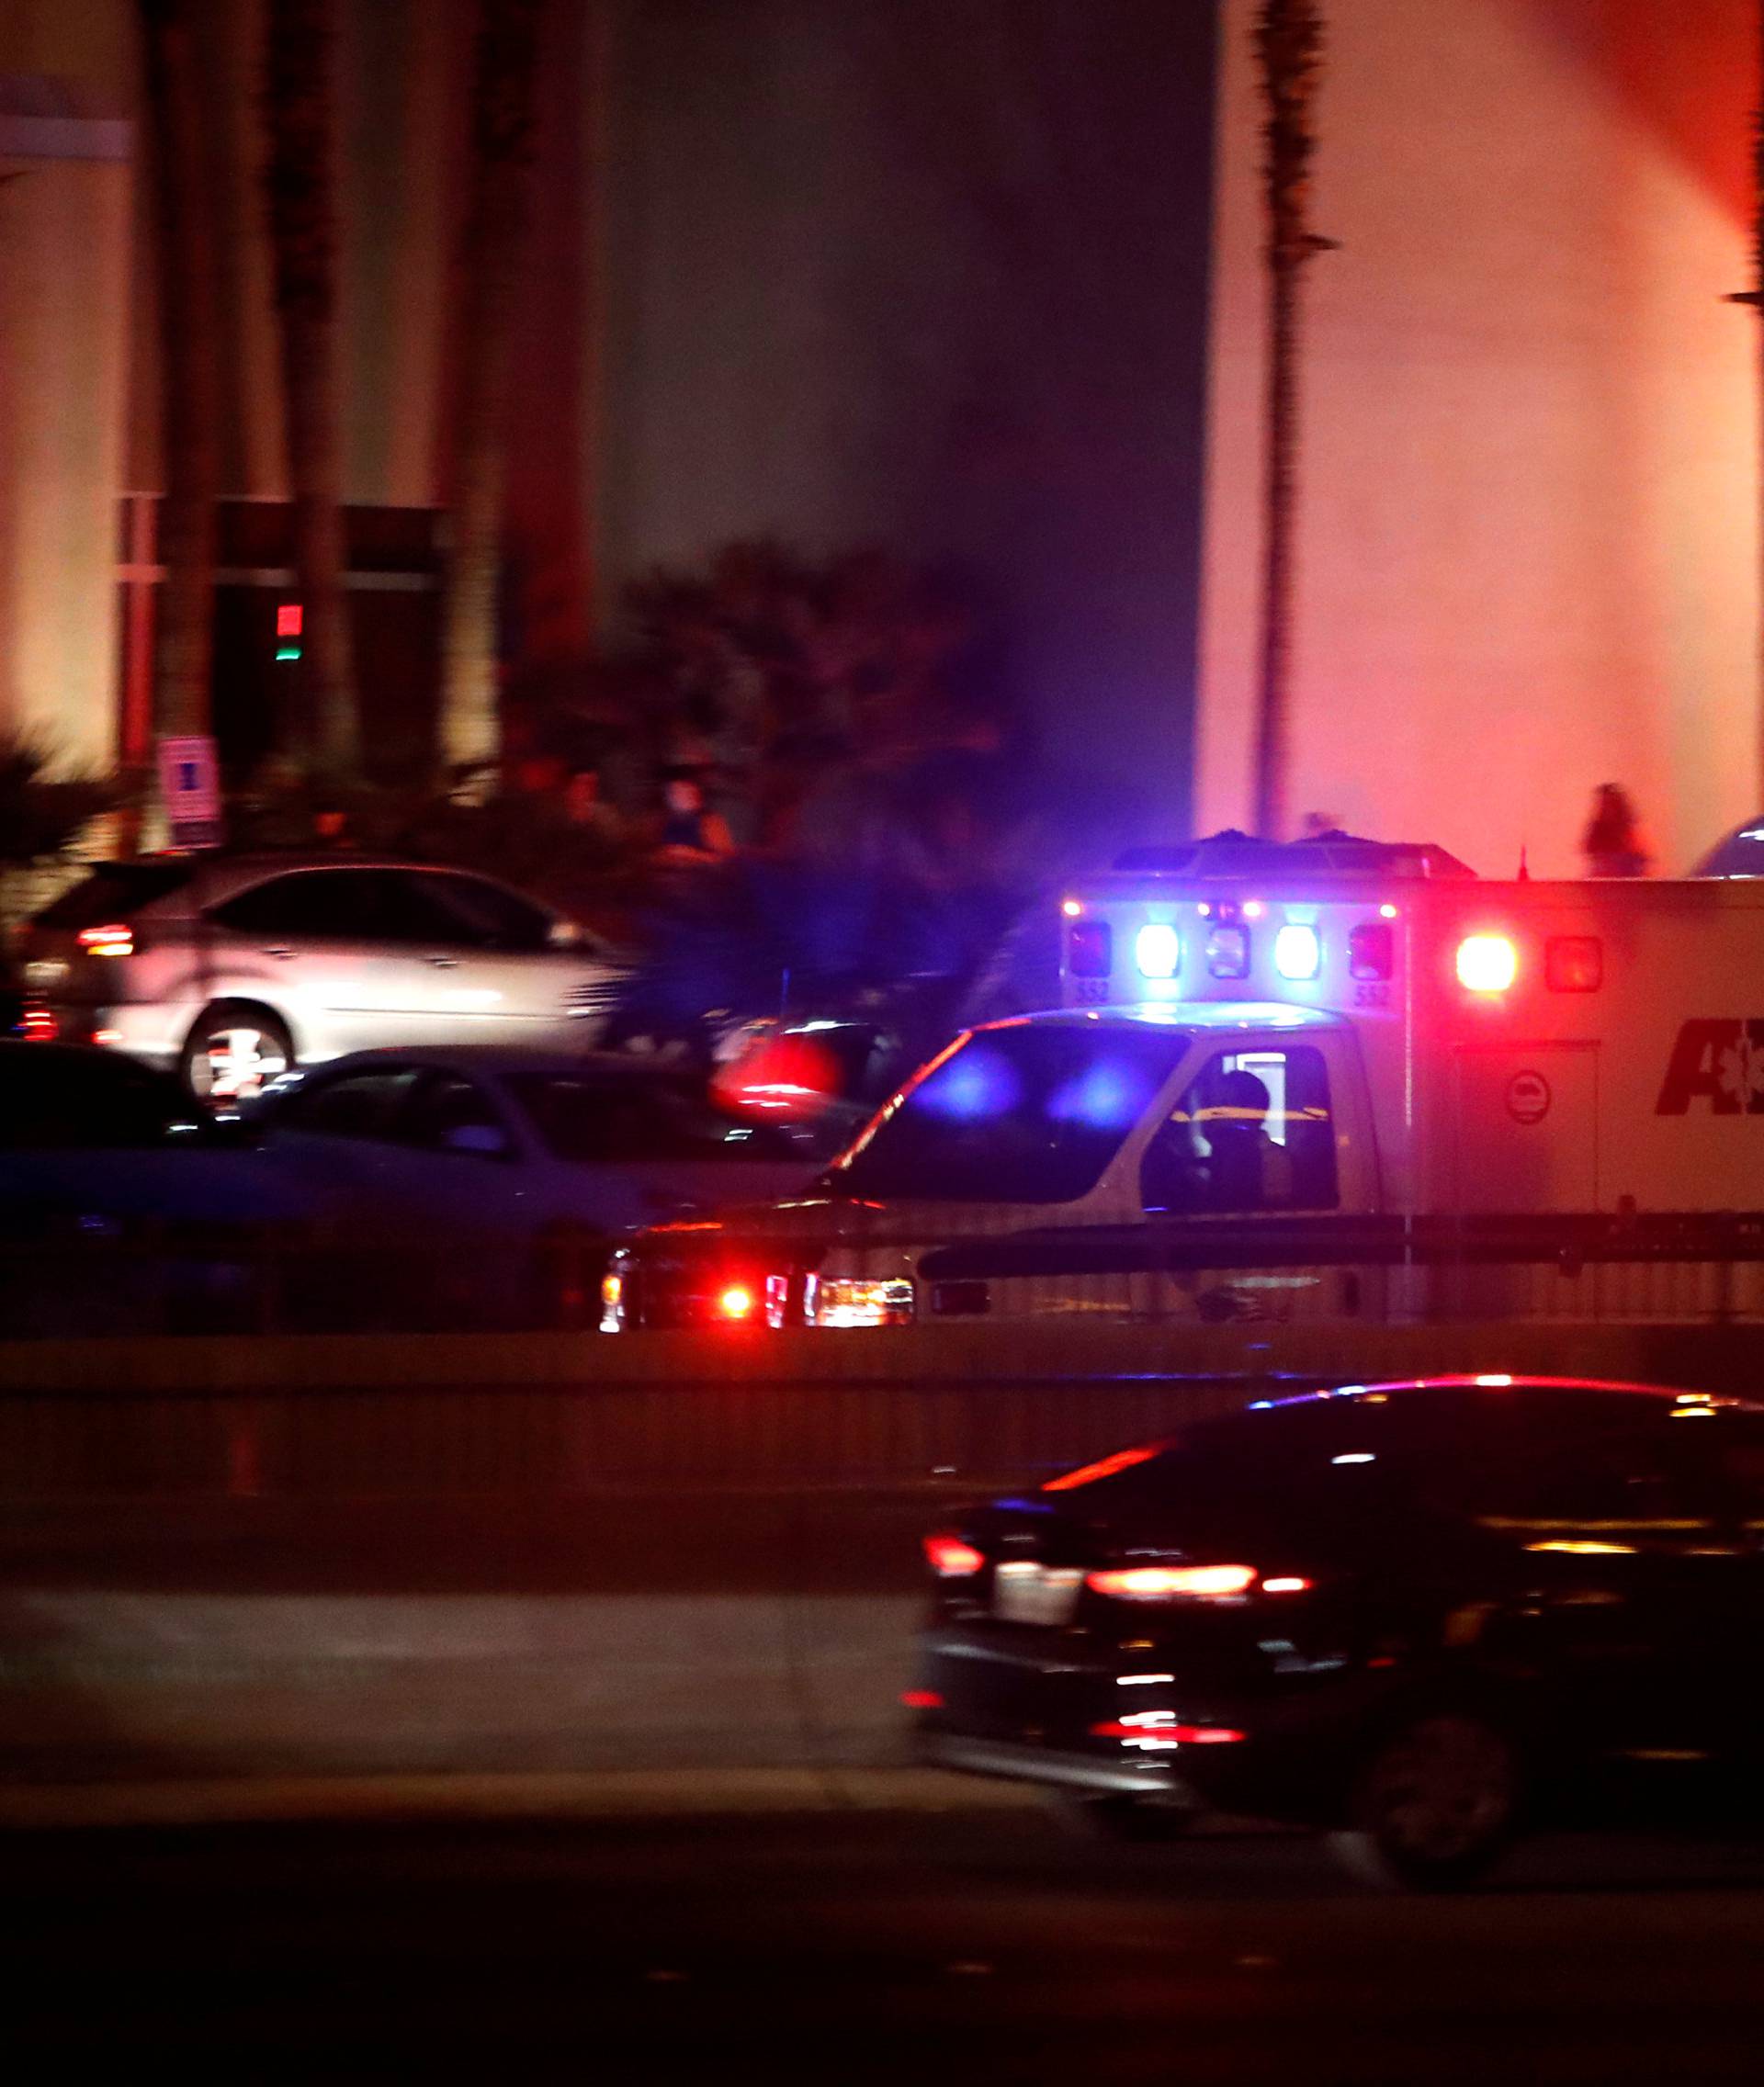 An ambulance heads to a hospital after a mass shooting at a music festival on the Las Vegas Strip in Las Vegas